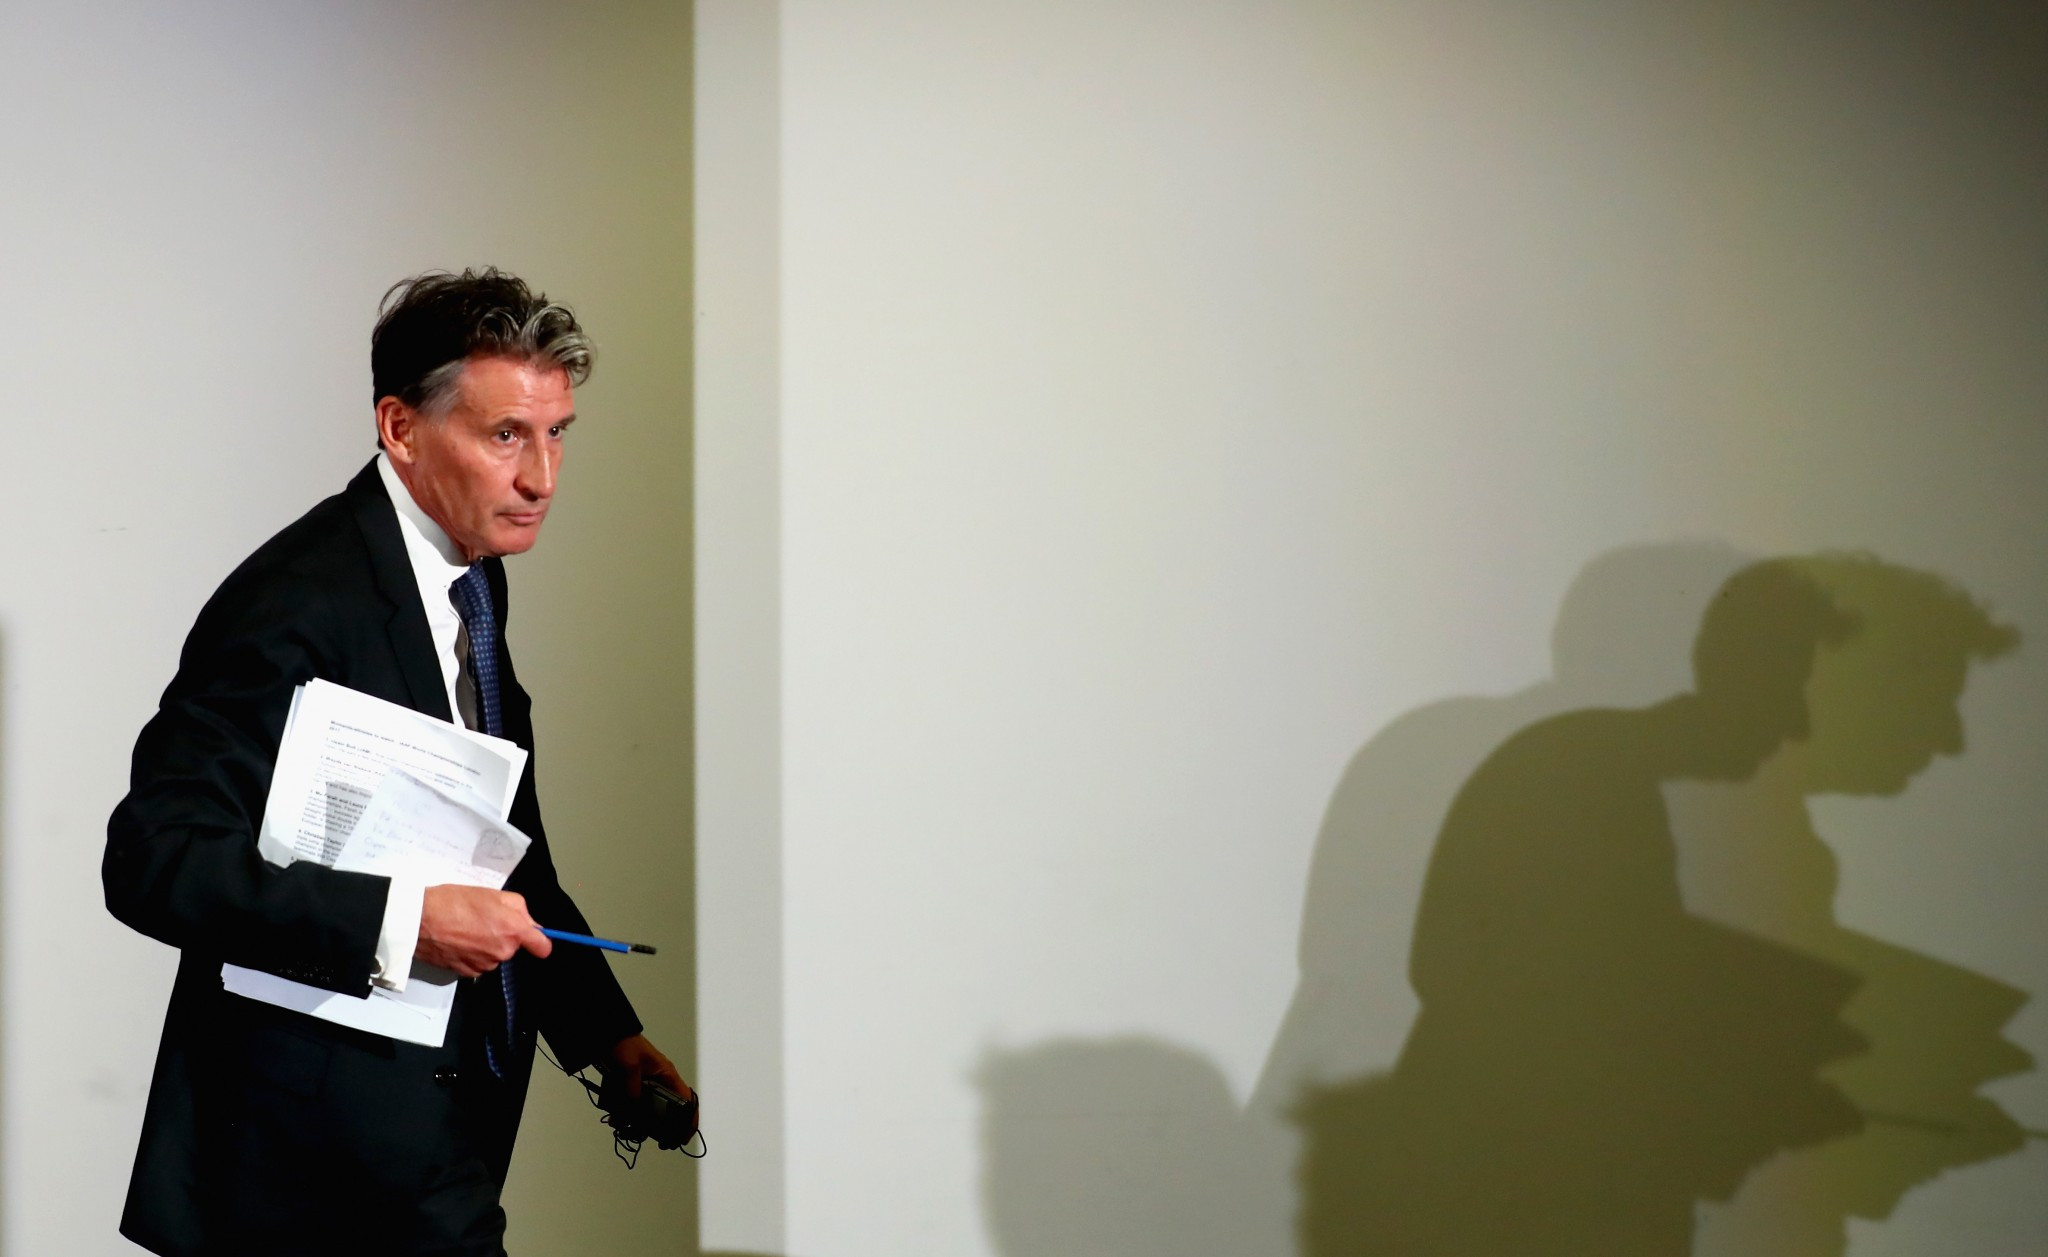 IAAF President Sebastian Coe gave a press conference at the end of the day ©Getty Images